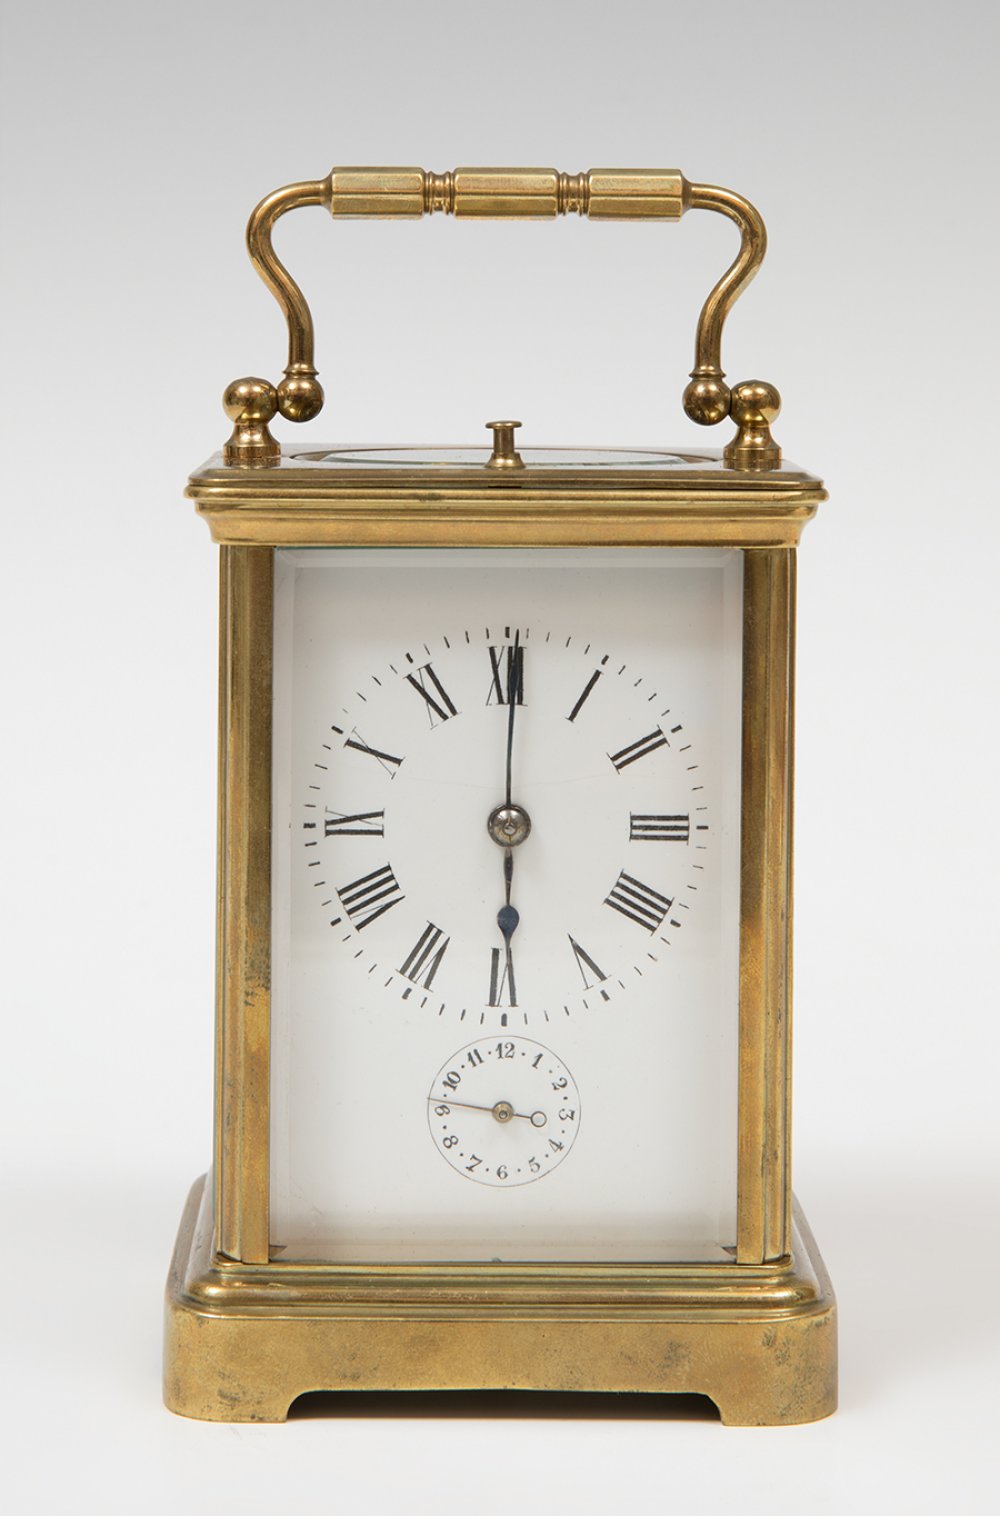 Travel clock; late 19th century.Bronze and bevelled glass.No key preserved.Precise set-up. - Image 3 of 6